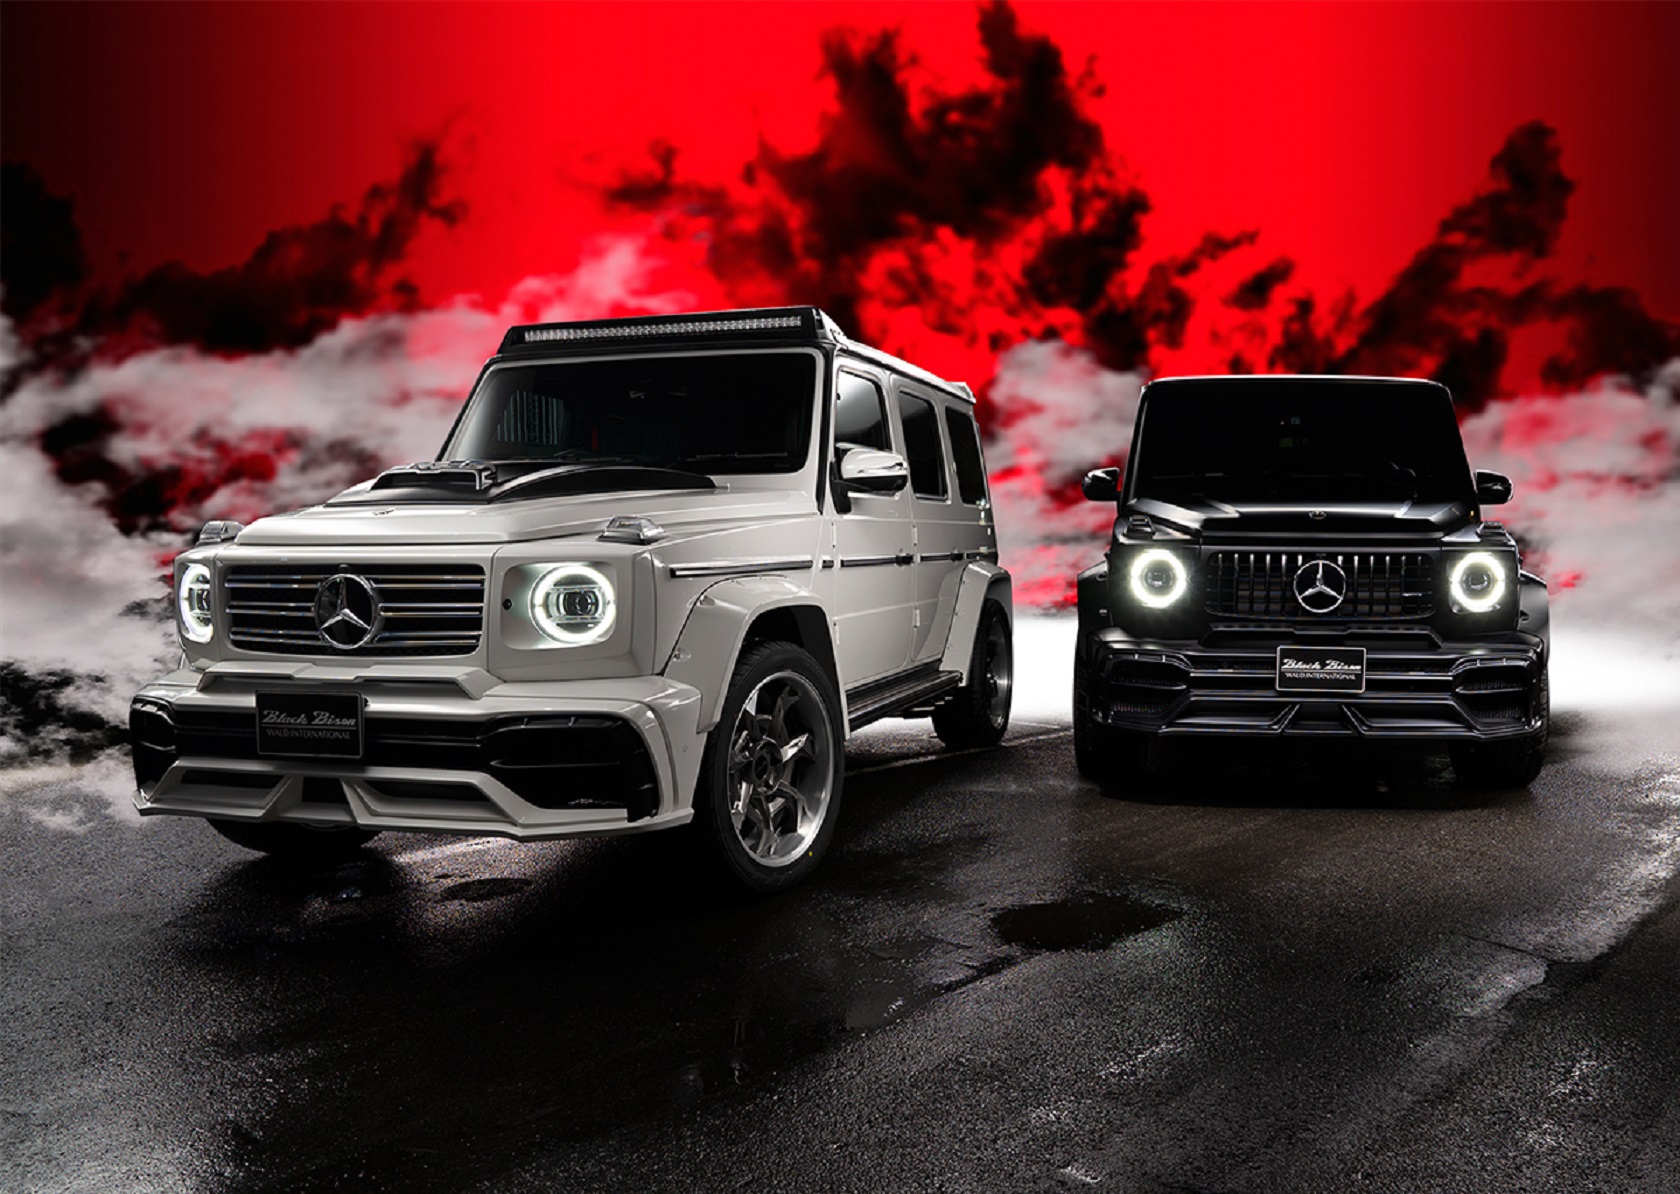 Wald Thinks The New Mercedes G-Class And AMG G63 Should Look Like This